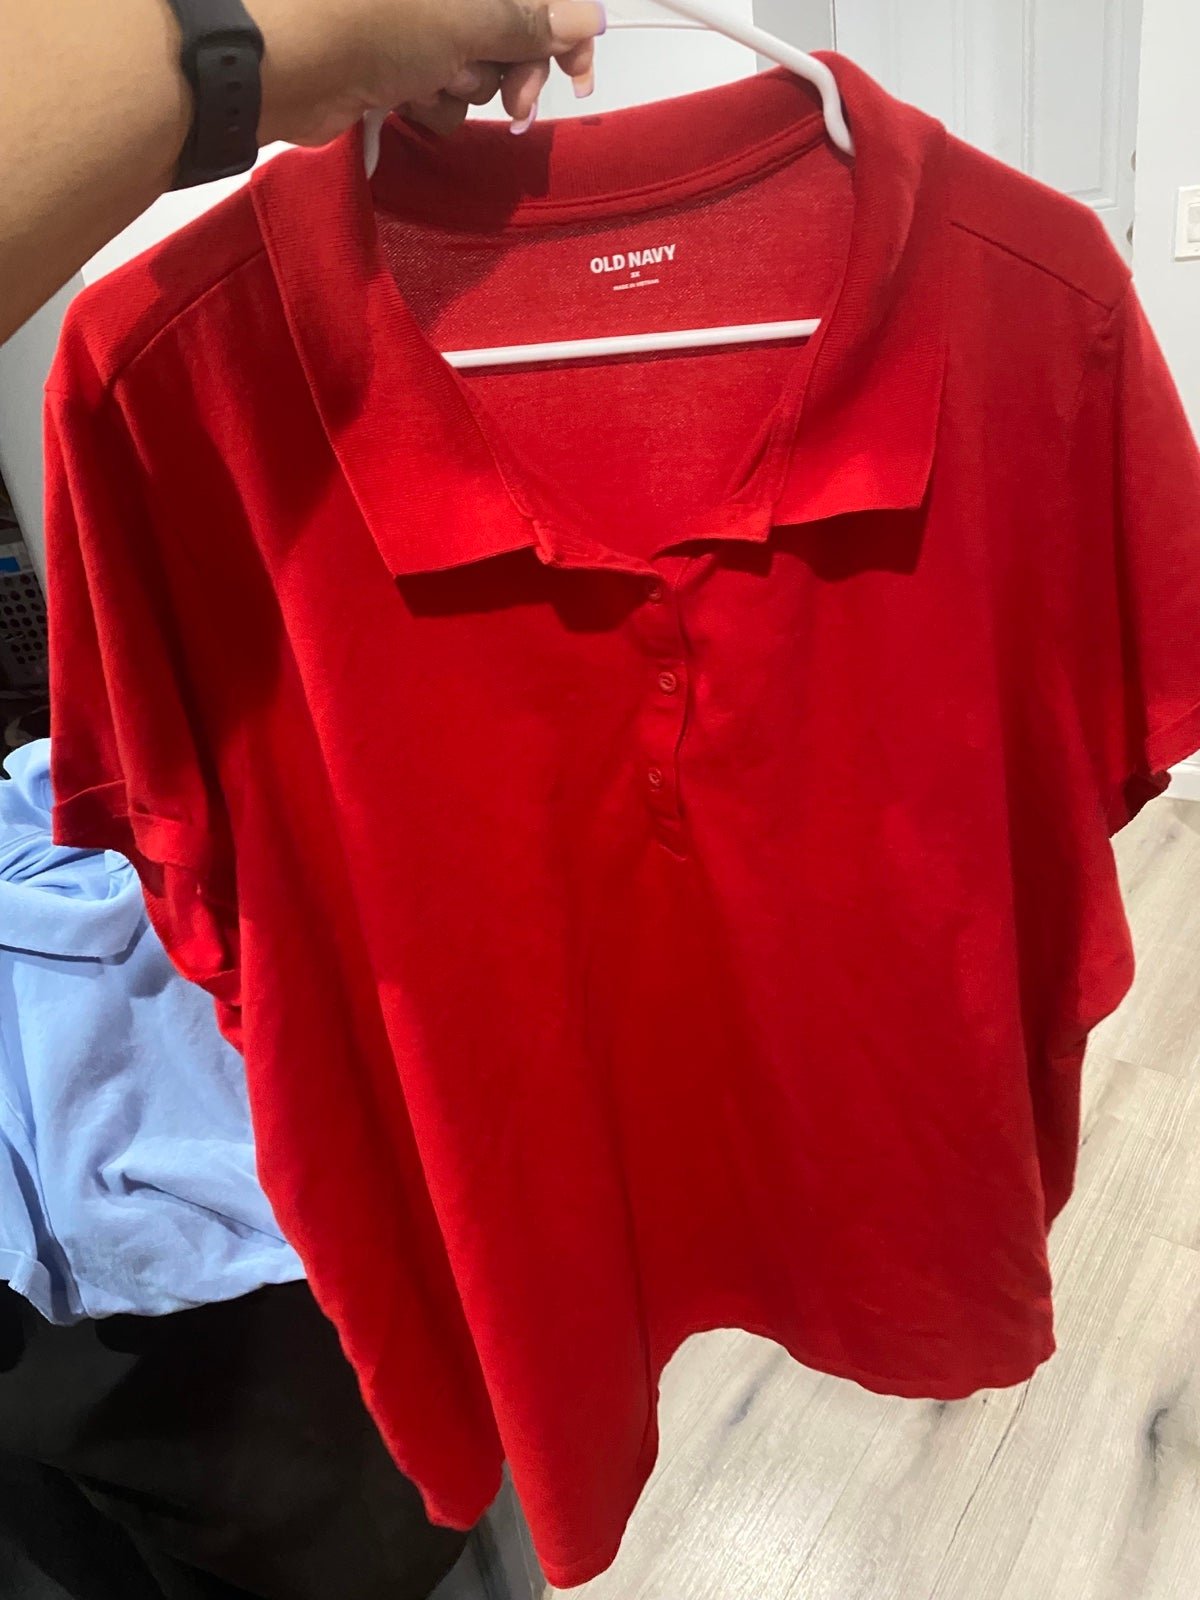 Wholesale price Red Old Navy Uniform Pique Polo for Women size 3x ITe8X2rYl Online Shop